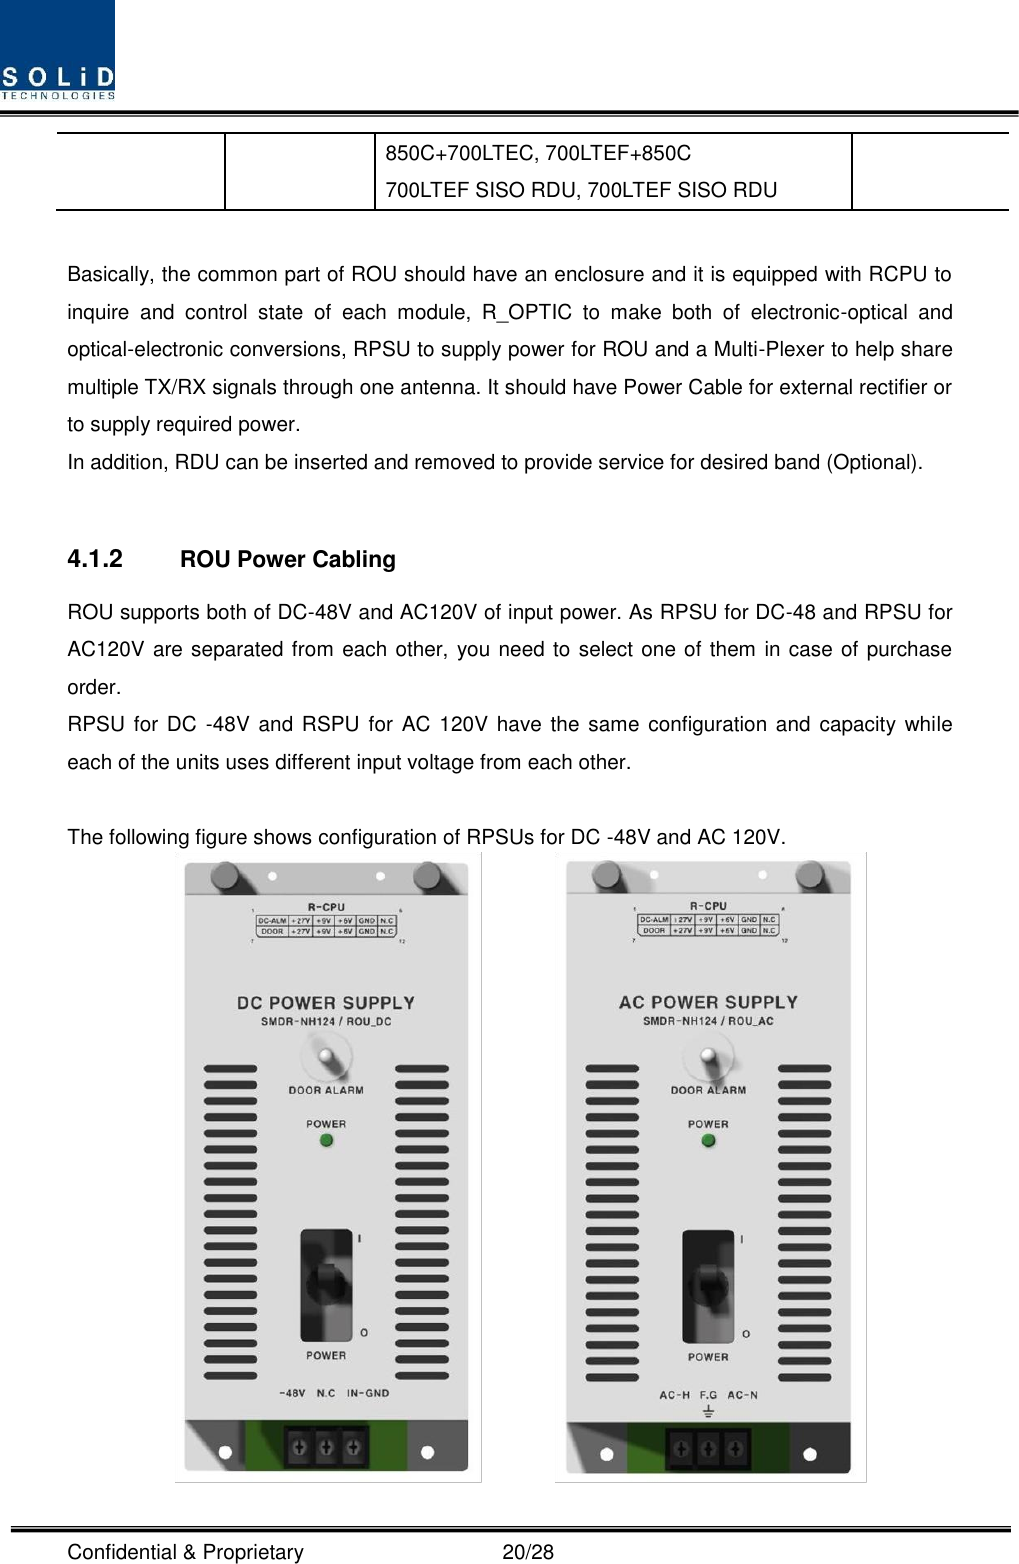  Confidential &amp; Proprietary                                      20/28 850C+700LTEC, 700LTEF+850C 700LTEF SISO RDU, 700LTEF SISO RDU  Basically, the common part of ROU should have an enclosure and it is equipped with RCPU to inquire  and  control  state  of  each  module,  R_OPTIC  to  make  both  of  electronic-optical  and optical-electronic conversions, RPSU to supply power for ROU and a Multi-Plexer to help share multiple TX/RX signals through one antenna. It should have Power Cable for external rectifier or to supply required power. In addition, RDU can be inserted and removed to provide service for desired band (Optional).  4.1.2  ROU Power Cabling ROU supports both of DC-48V and AC120V of input power. As RPSU for DC-48 and RPSU for AC120V are separated from each other, you need to select one of them in case of purchase order. RPSU for DC  -48V  and RSPU for AC 120V  have the same  configuration and capacity while each of the units uses different input voltage from each other.  The following figure shows configuration of RPSUs for DC -48V and AC 120V.          